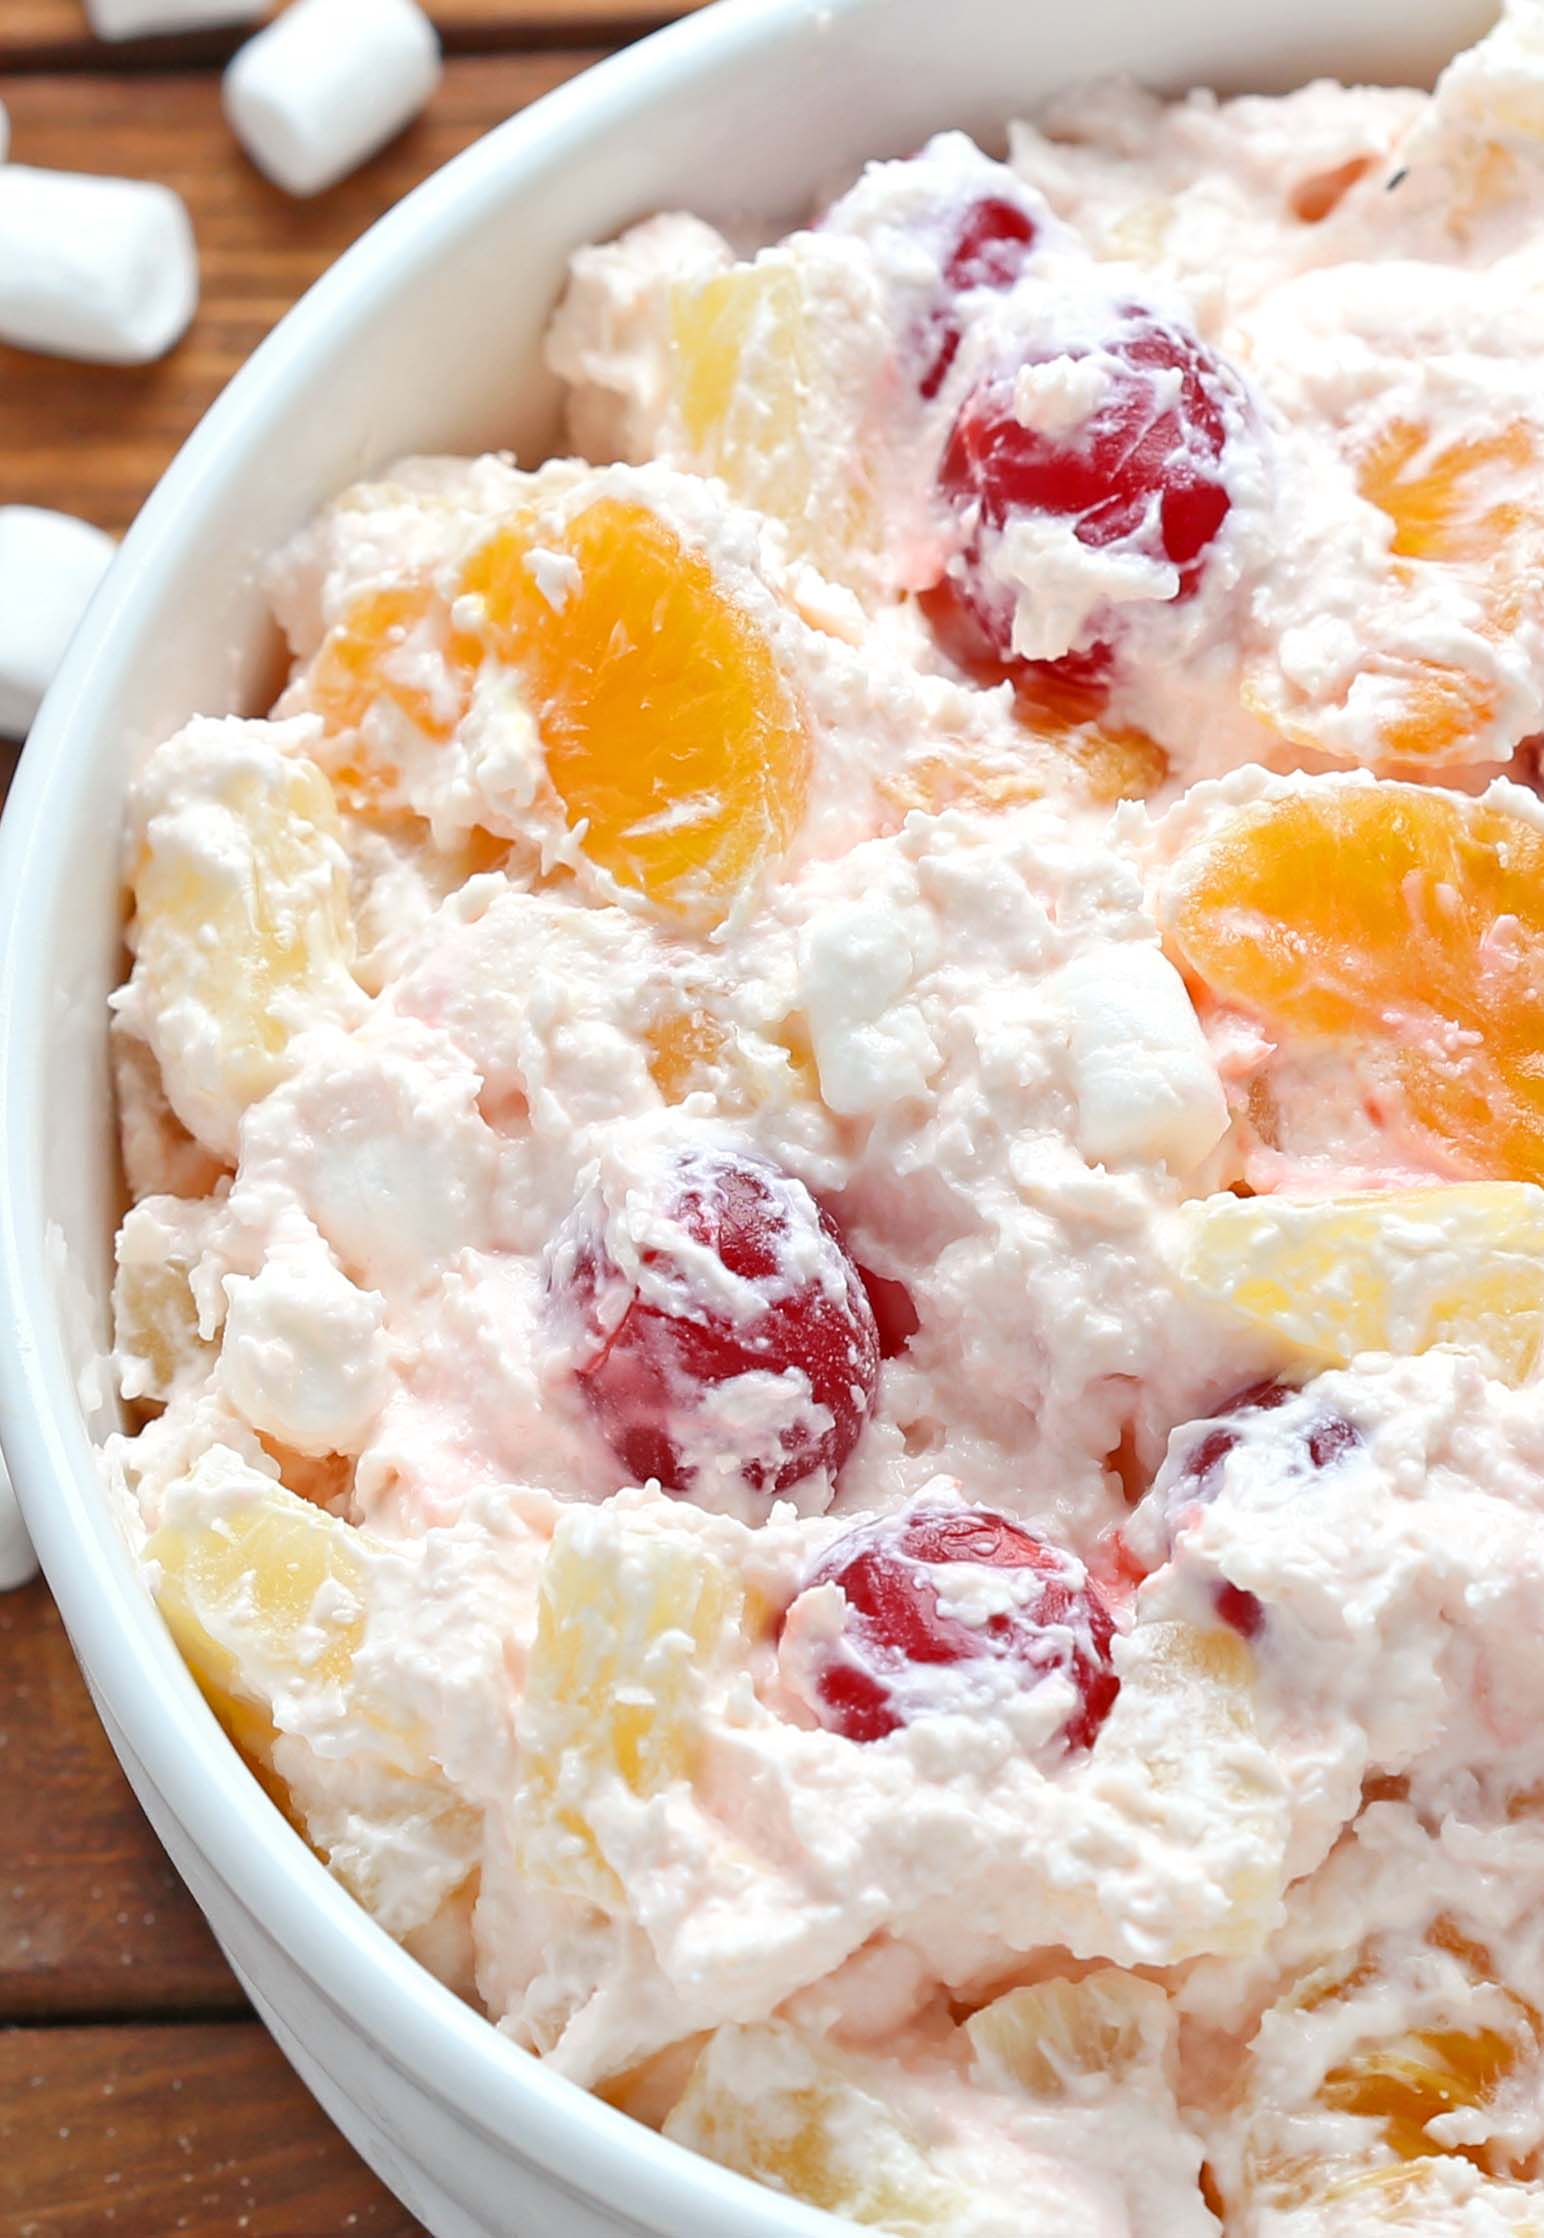  a light and refreshing fruit salad just as perfect for an everyday treat as for holidays.